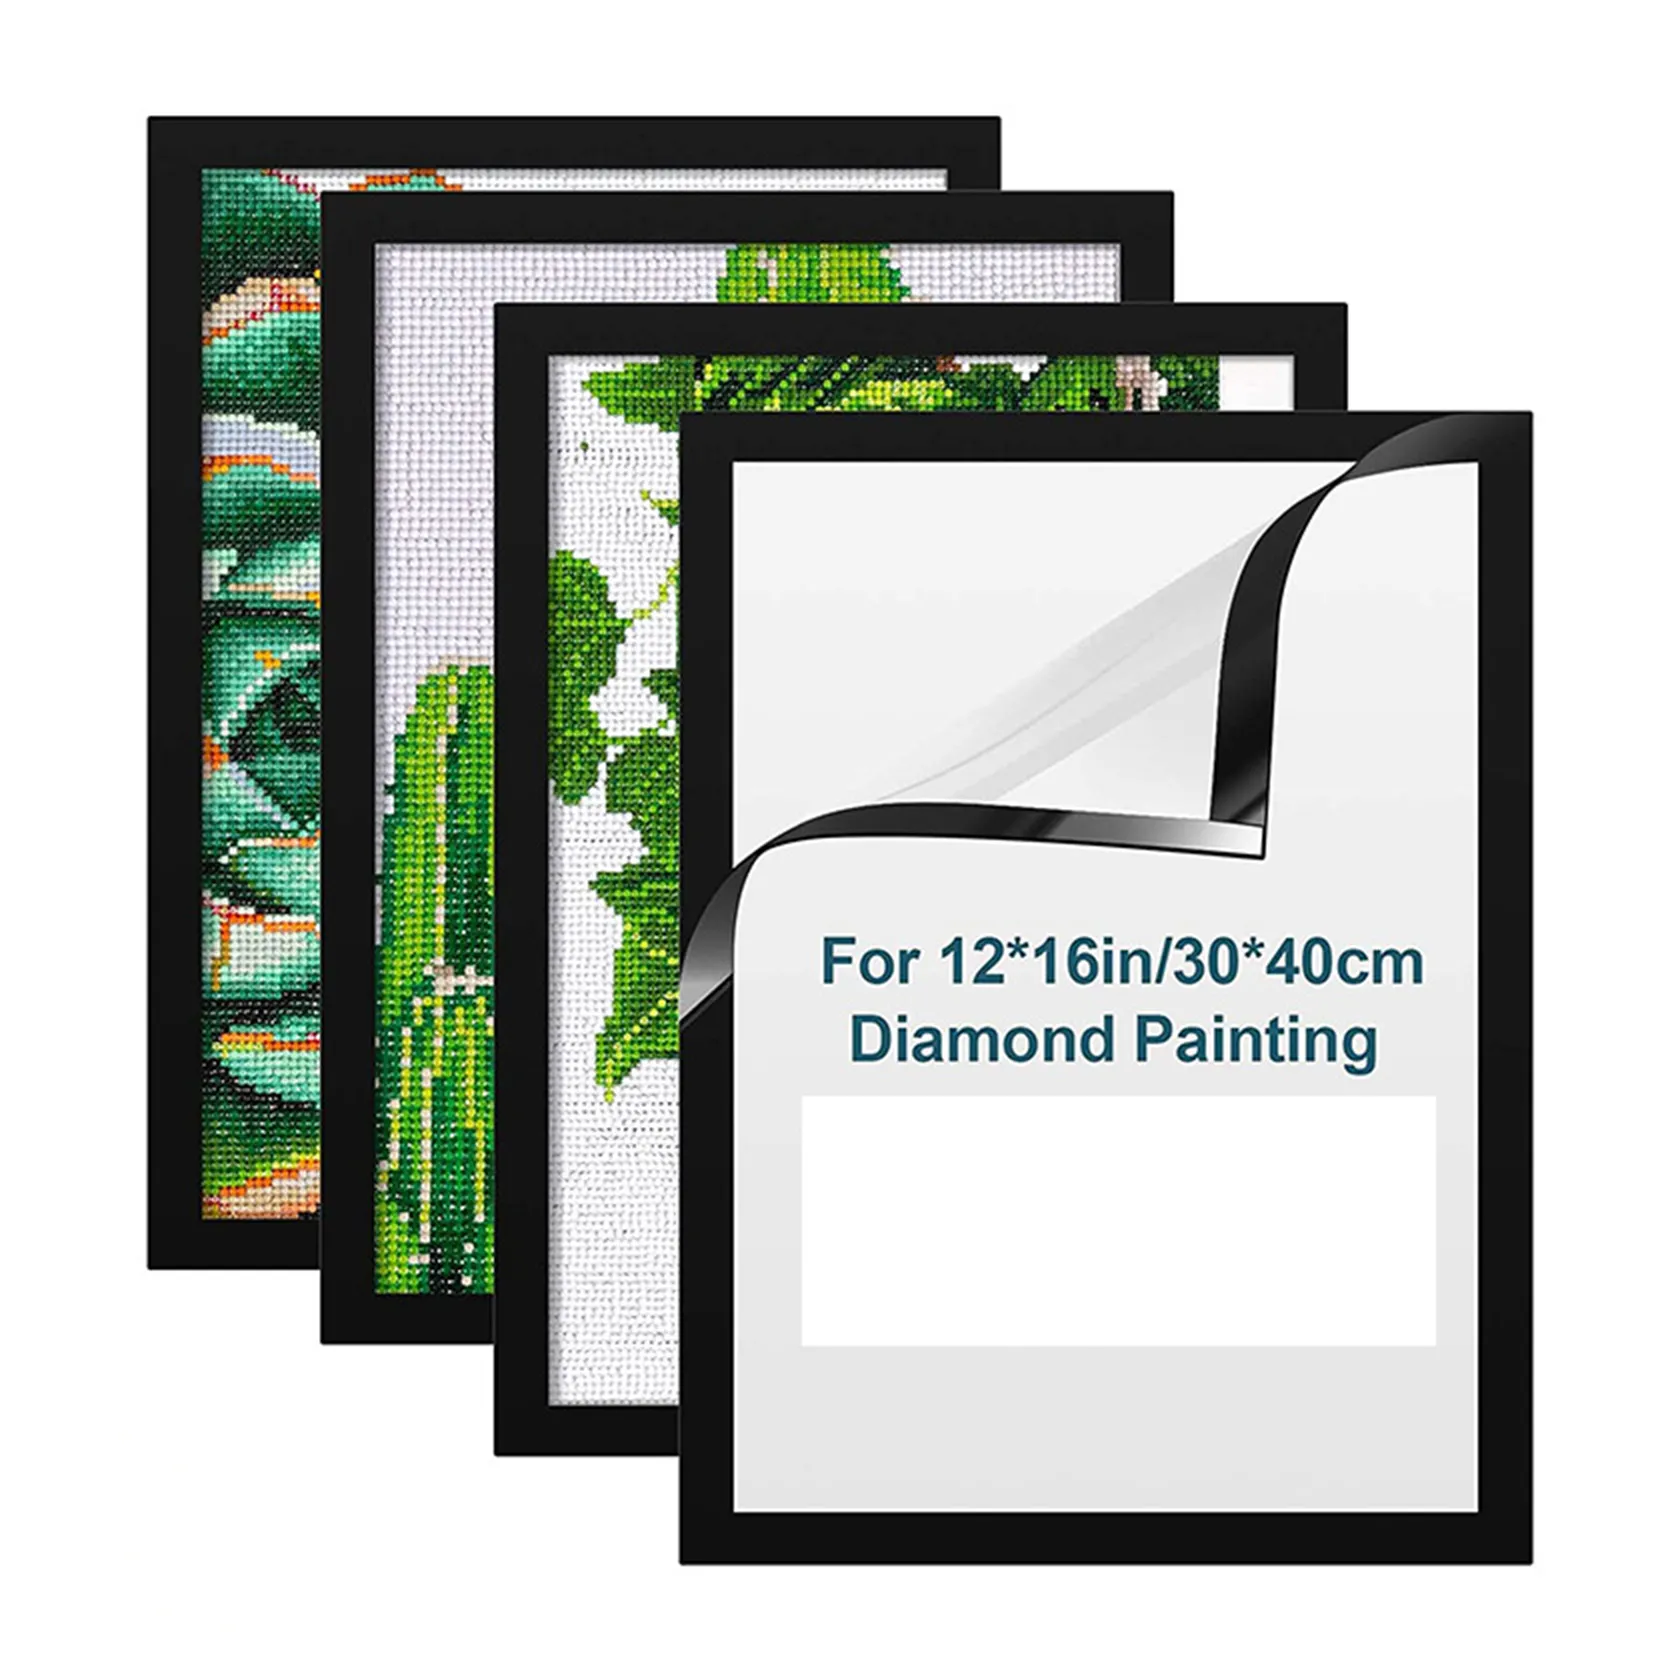 Diamond Painting Magnetic Photo Frame PVC Magnetic Self-adhesive Picture Frame For Painting Certificate Paper File Display